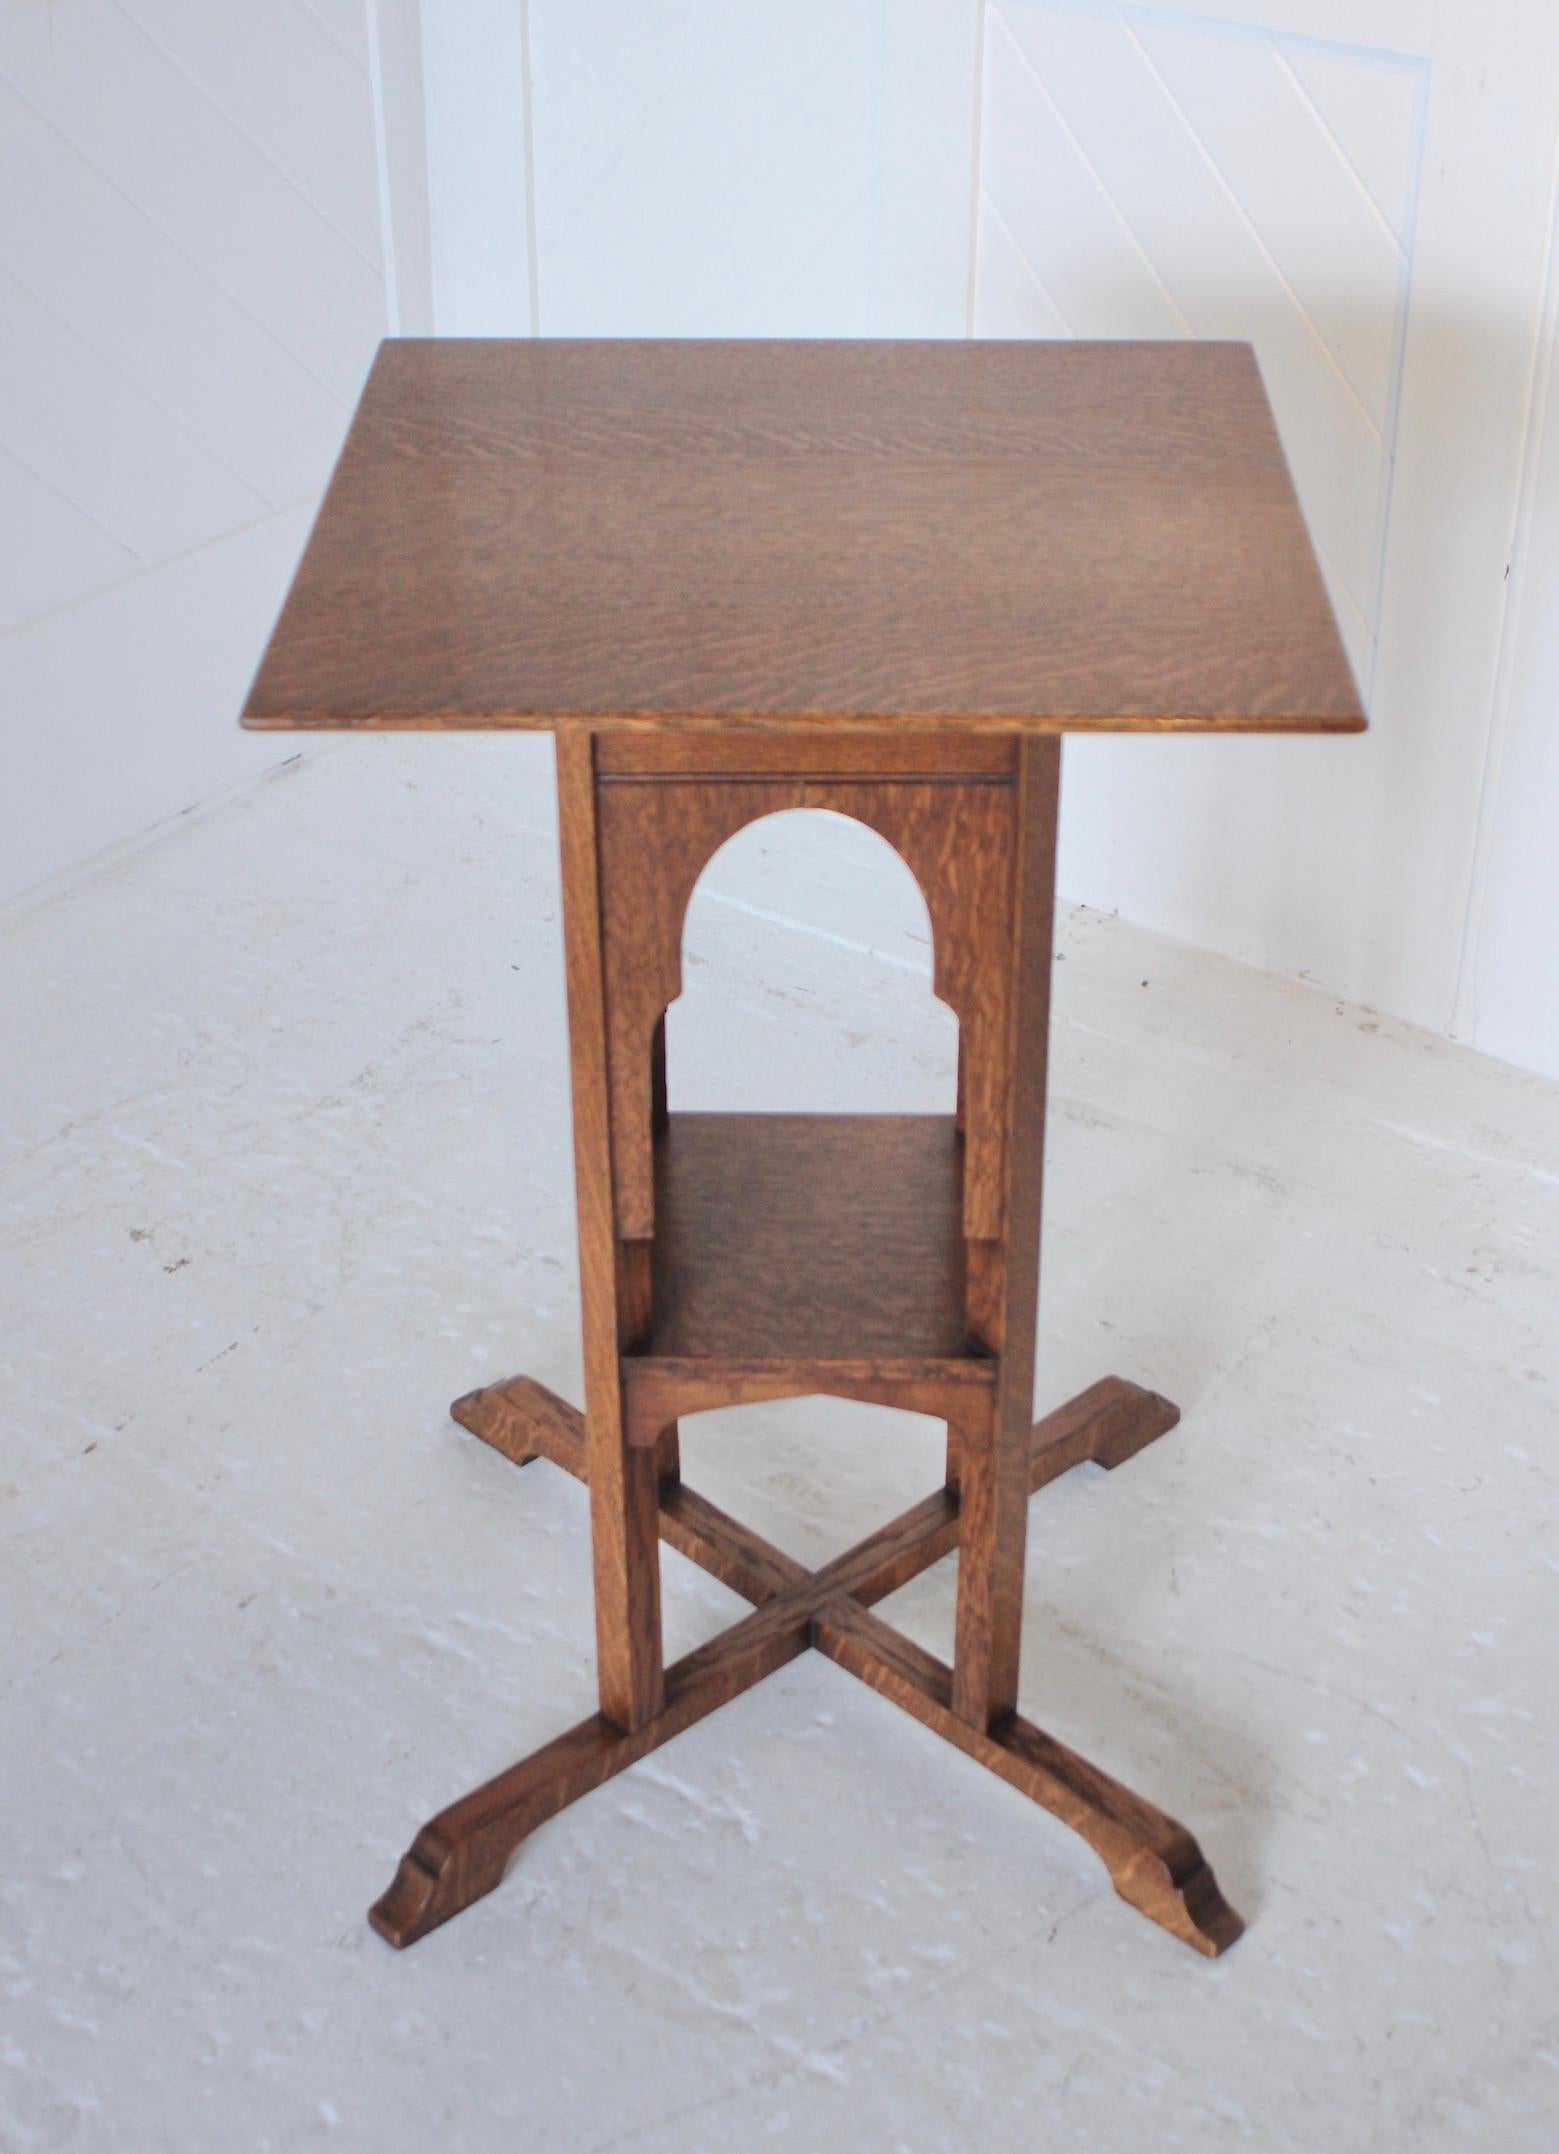 An unusual Arts & Crafts quarter-sawn oak side table. This table has been influenced by the Moresque style with arched and beaded panels. This design looks as if it should be by Liberty & Co but it also has elements which relate to some Austrian